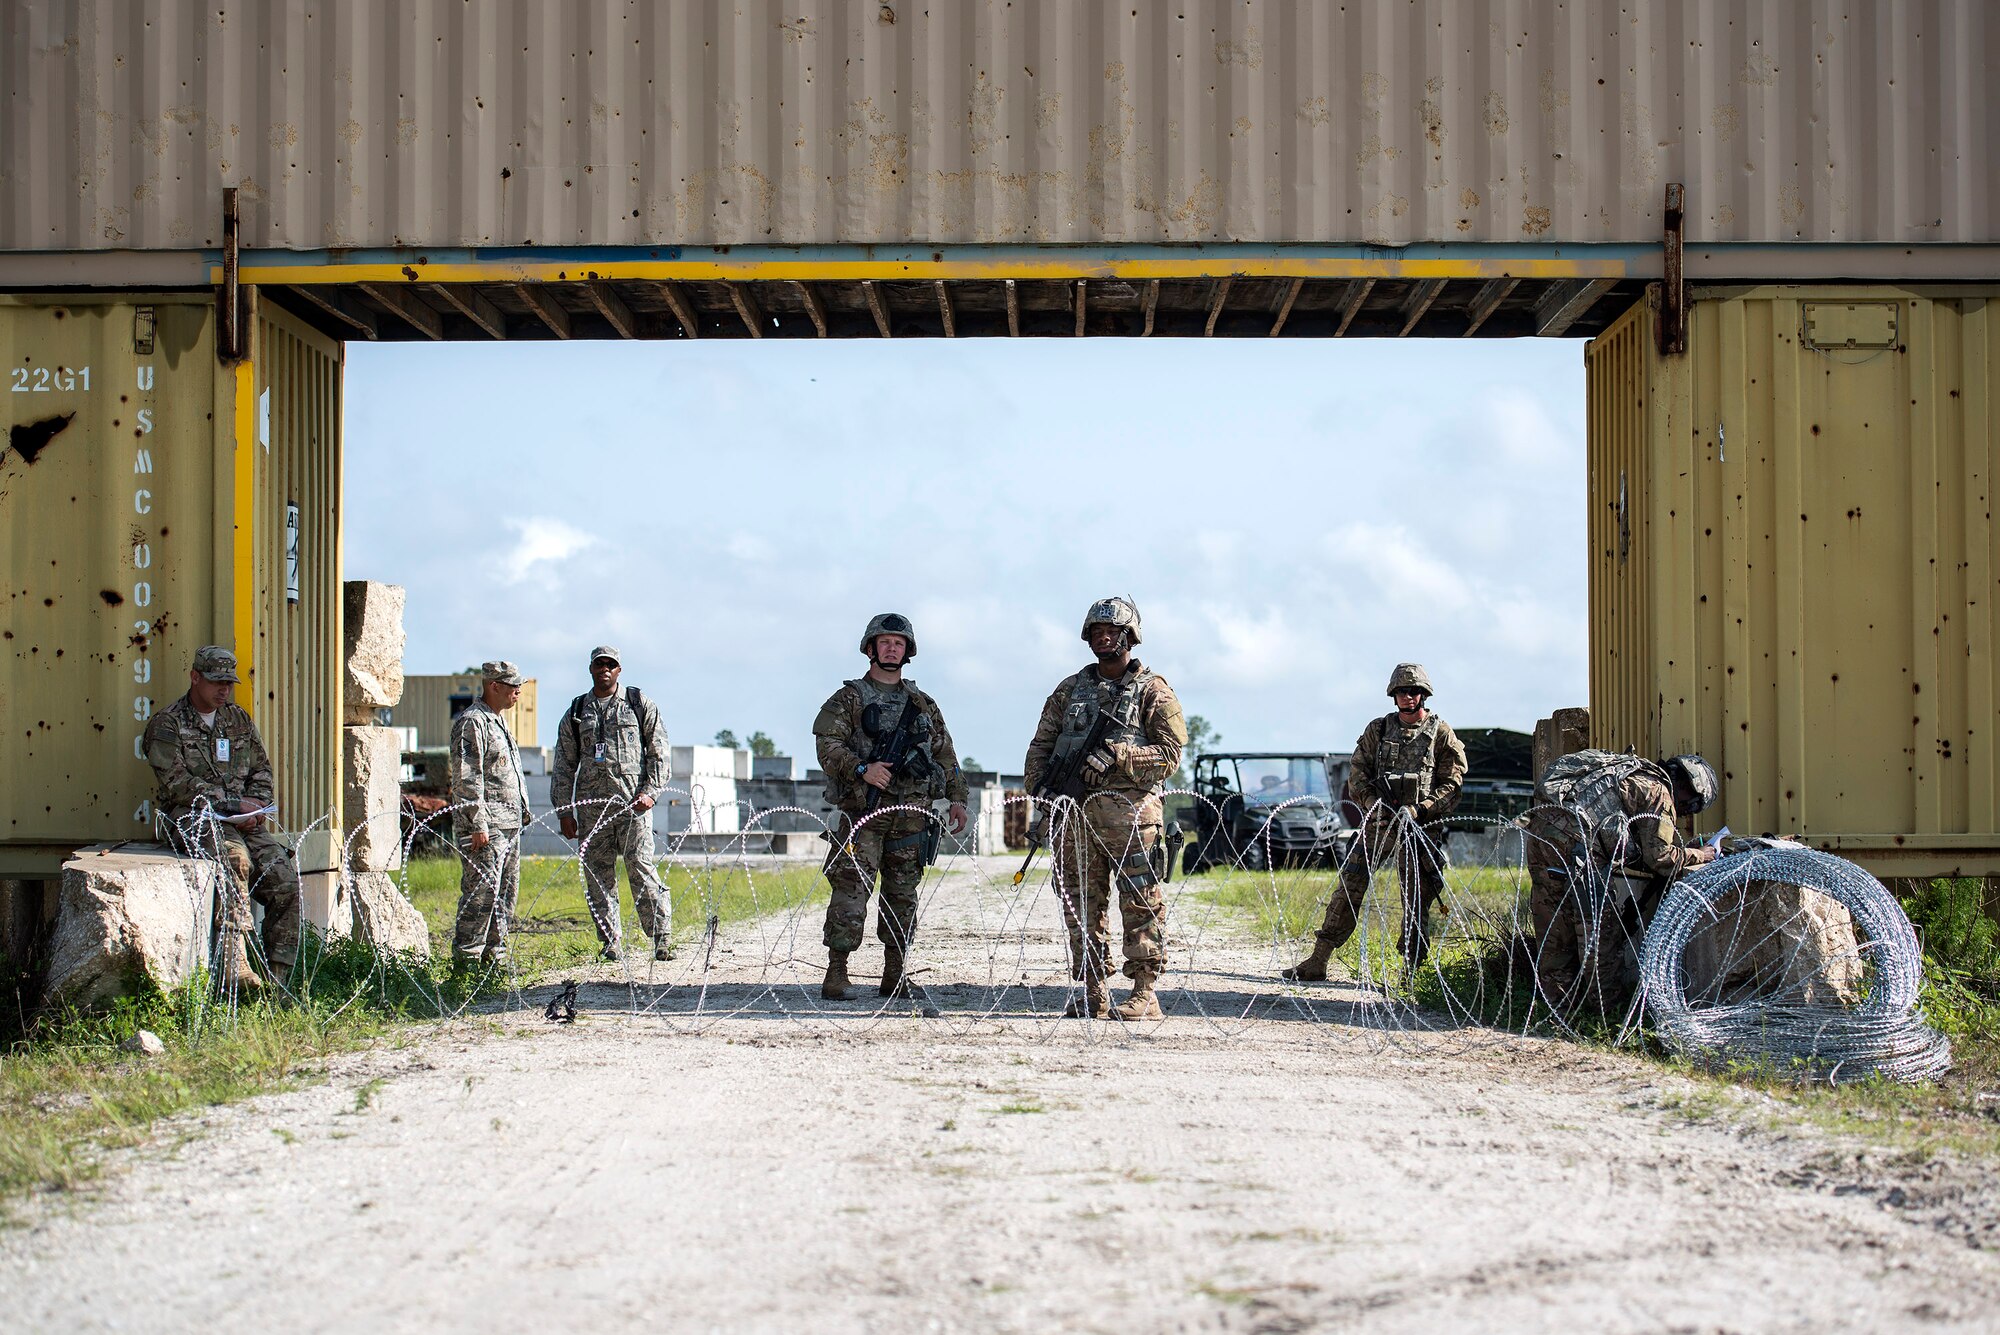 Airmen set up an entry control point during Spartan Warrior week April 14, 2016, Avon Park Air Force Range, Fla. Participants were graded on their ability to set-up and defend an entry control point. (U.S. Air Force photo by Airman 1st Class Janiqua P. Robinson/Released)